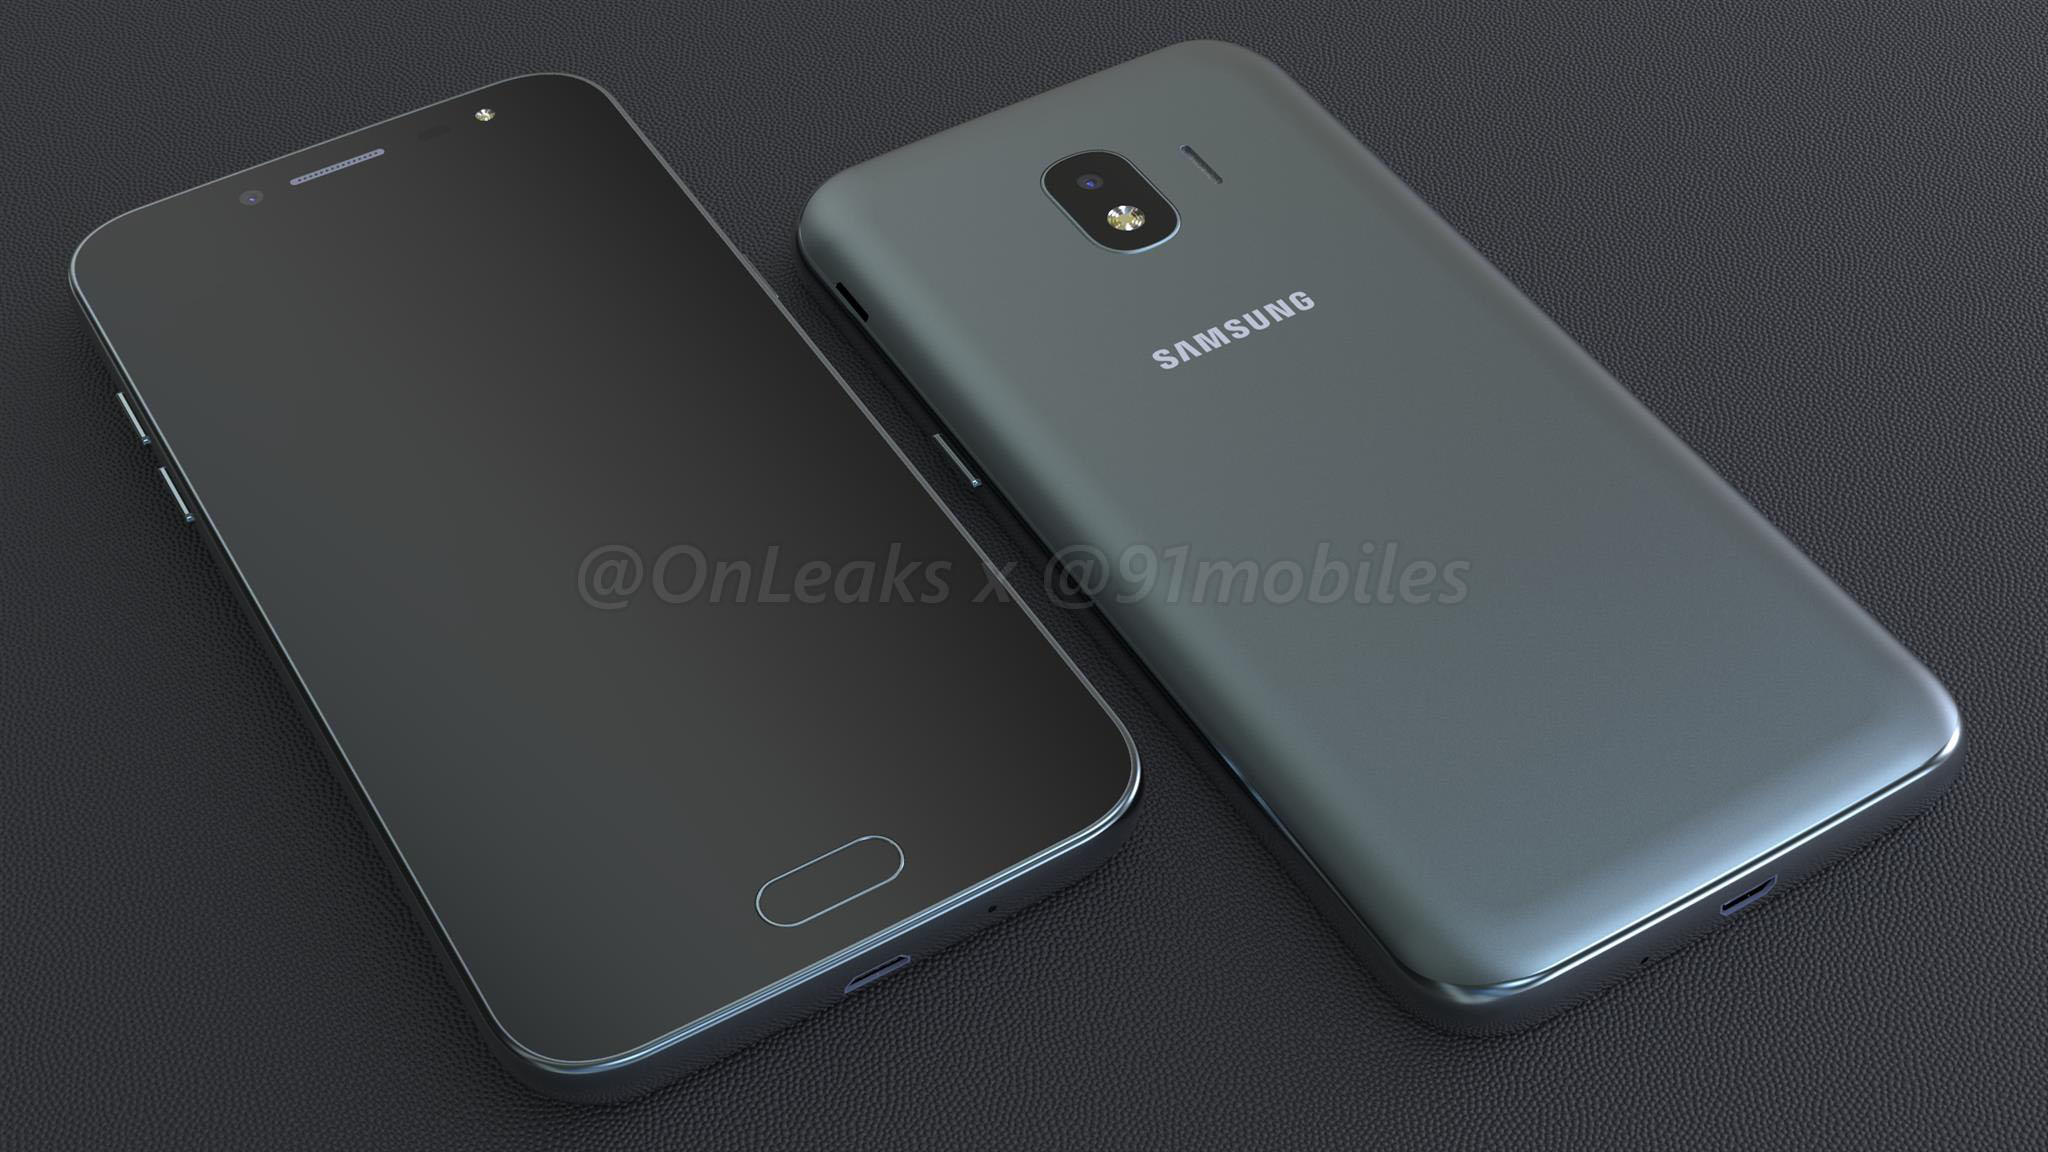 Exclusive: Samsung Galaxy J2 Pro (2018) renders and 360-degree video |  